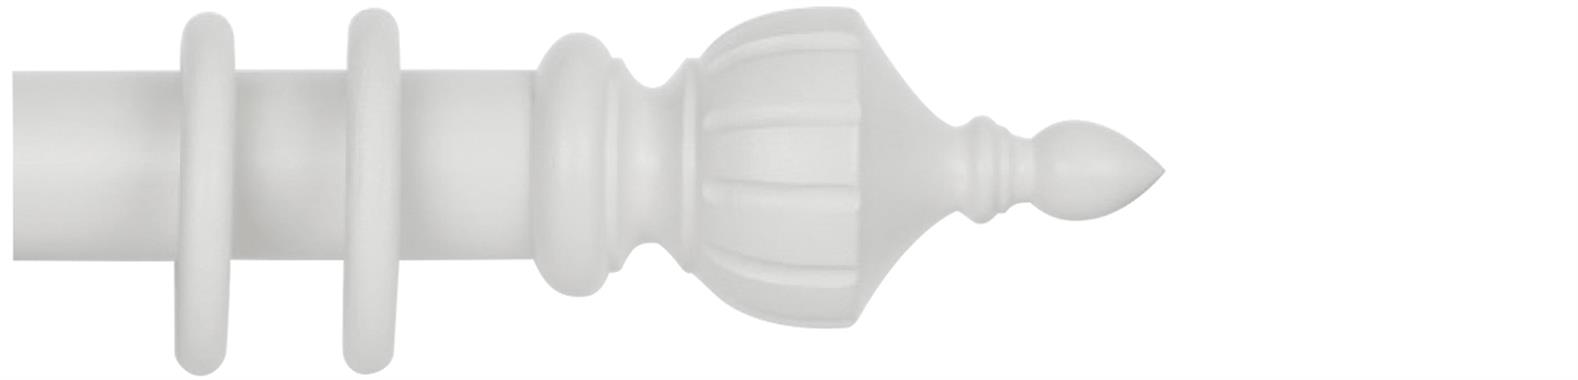 Cameron Fuller 63mm Pole White Crown